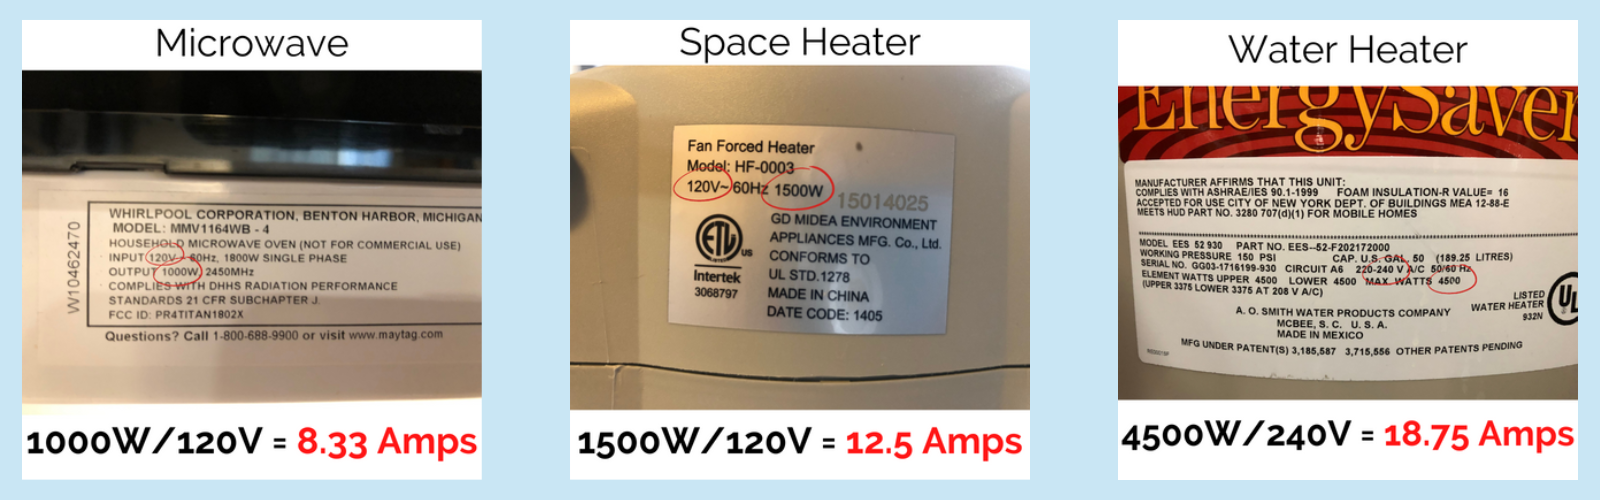 Calculating Amps from Watts and Volts for microwave, space heater, and water heater